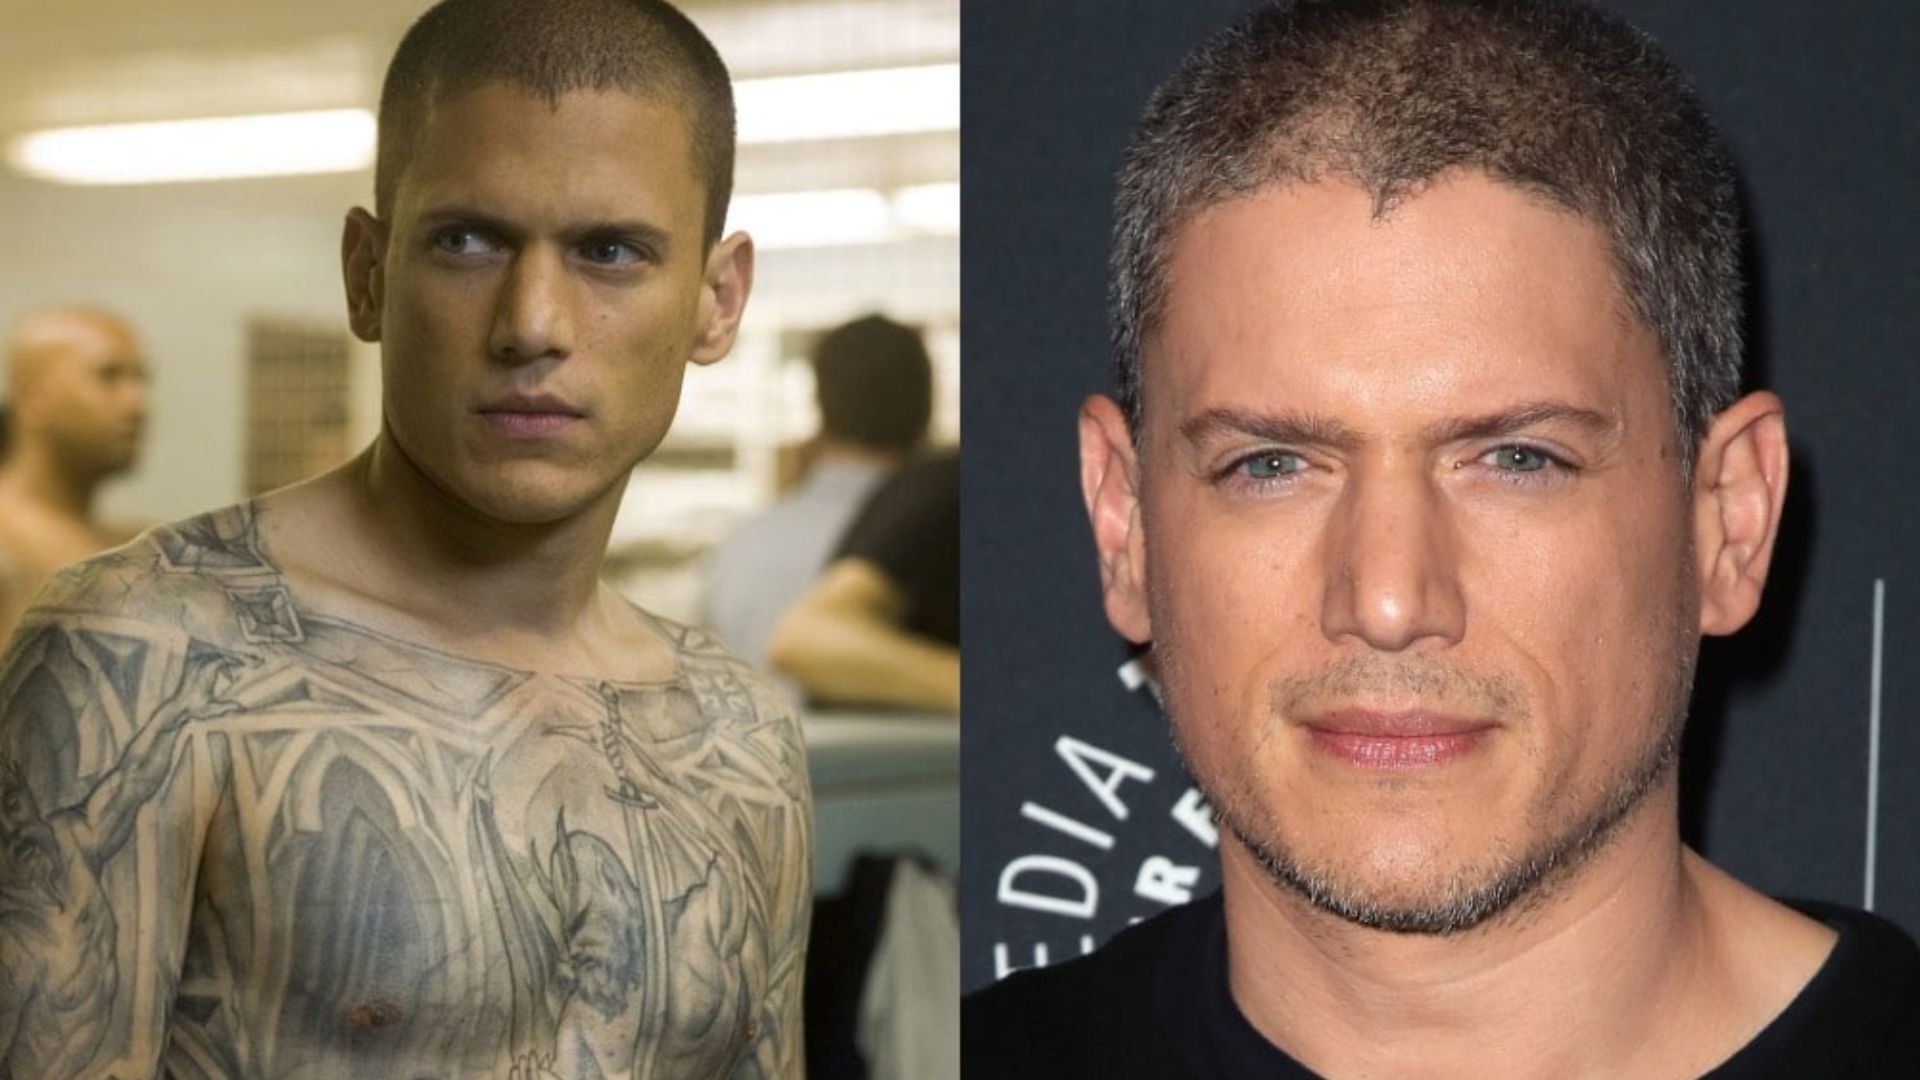 Wentworth Miller - An American-British Actor And Screenwriter